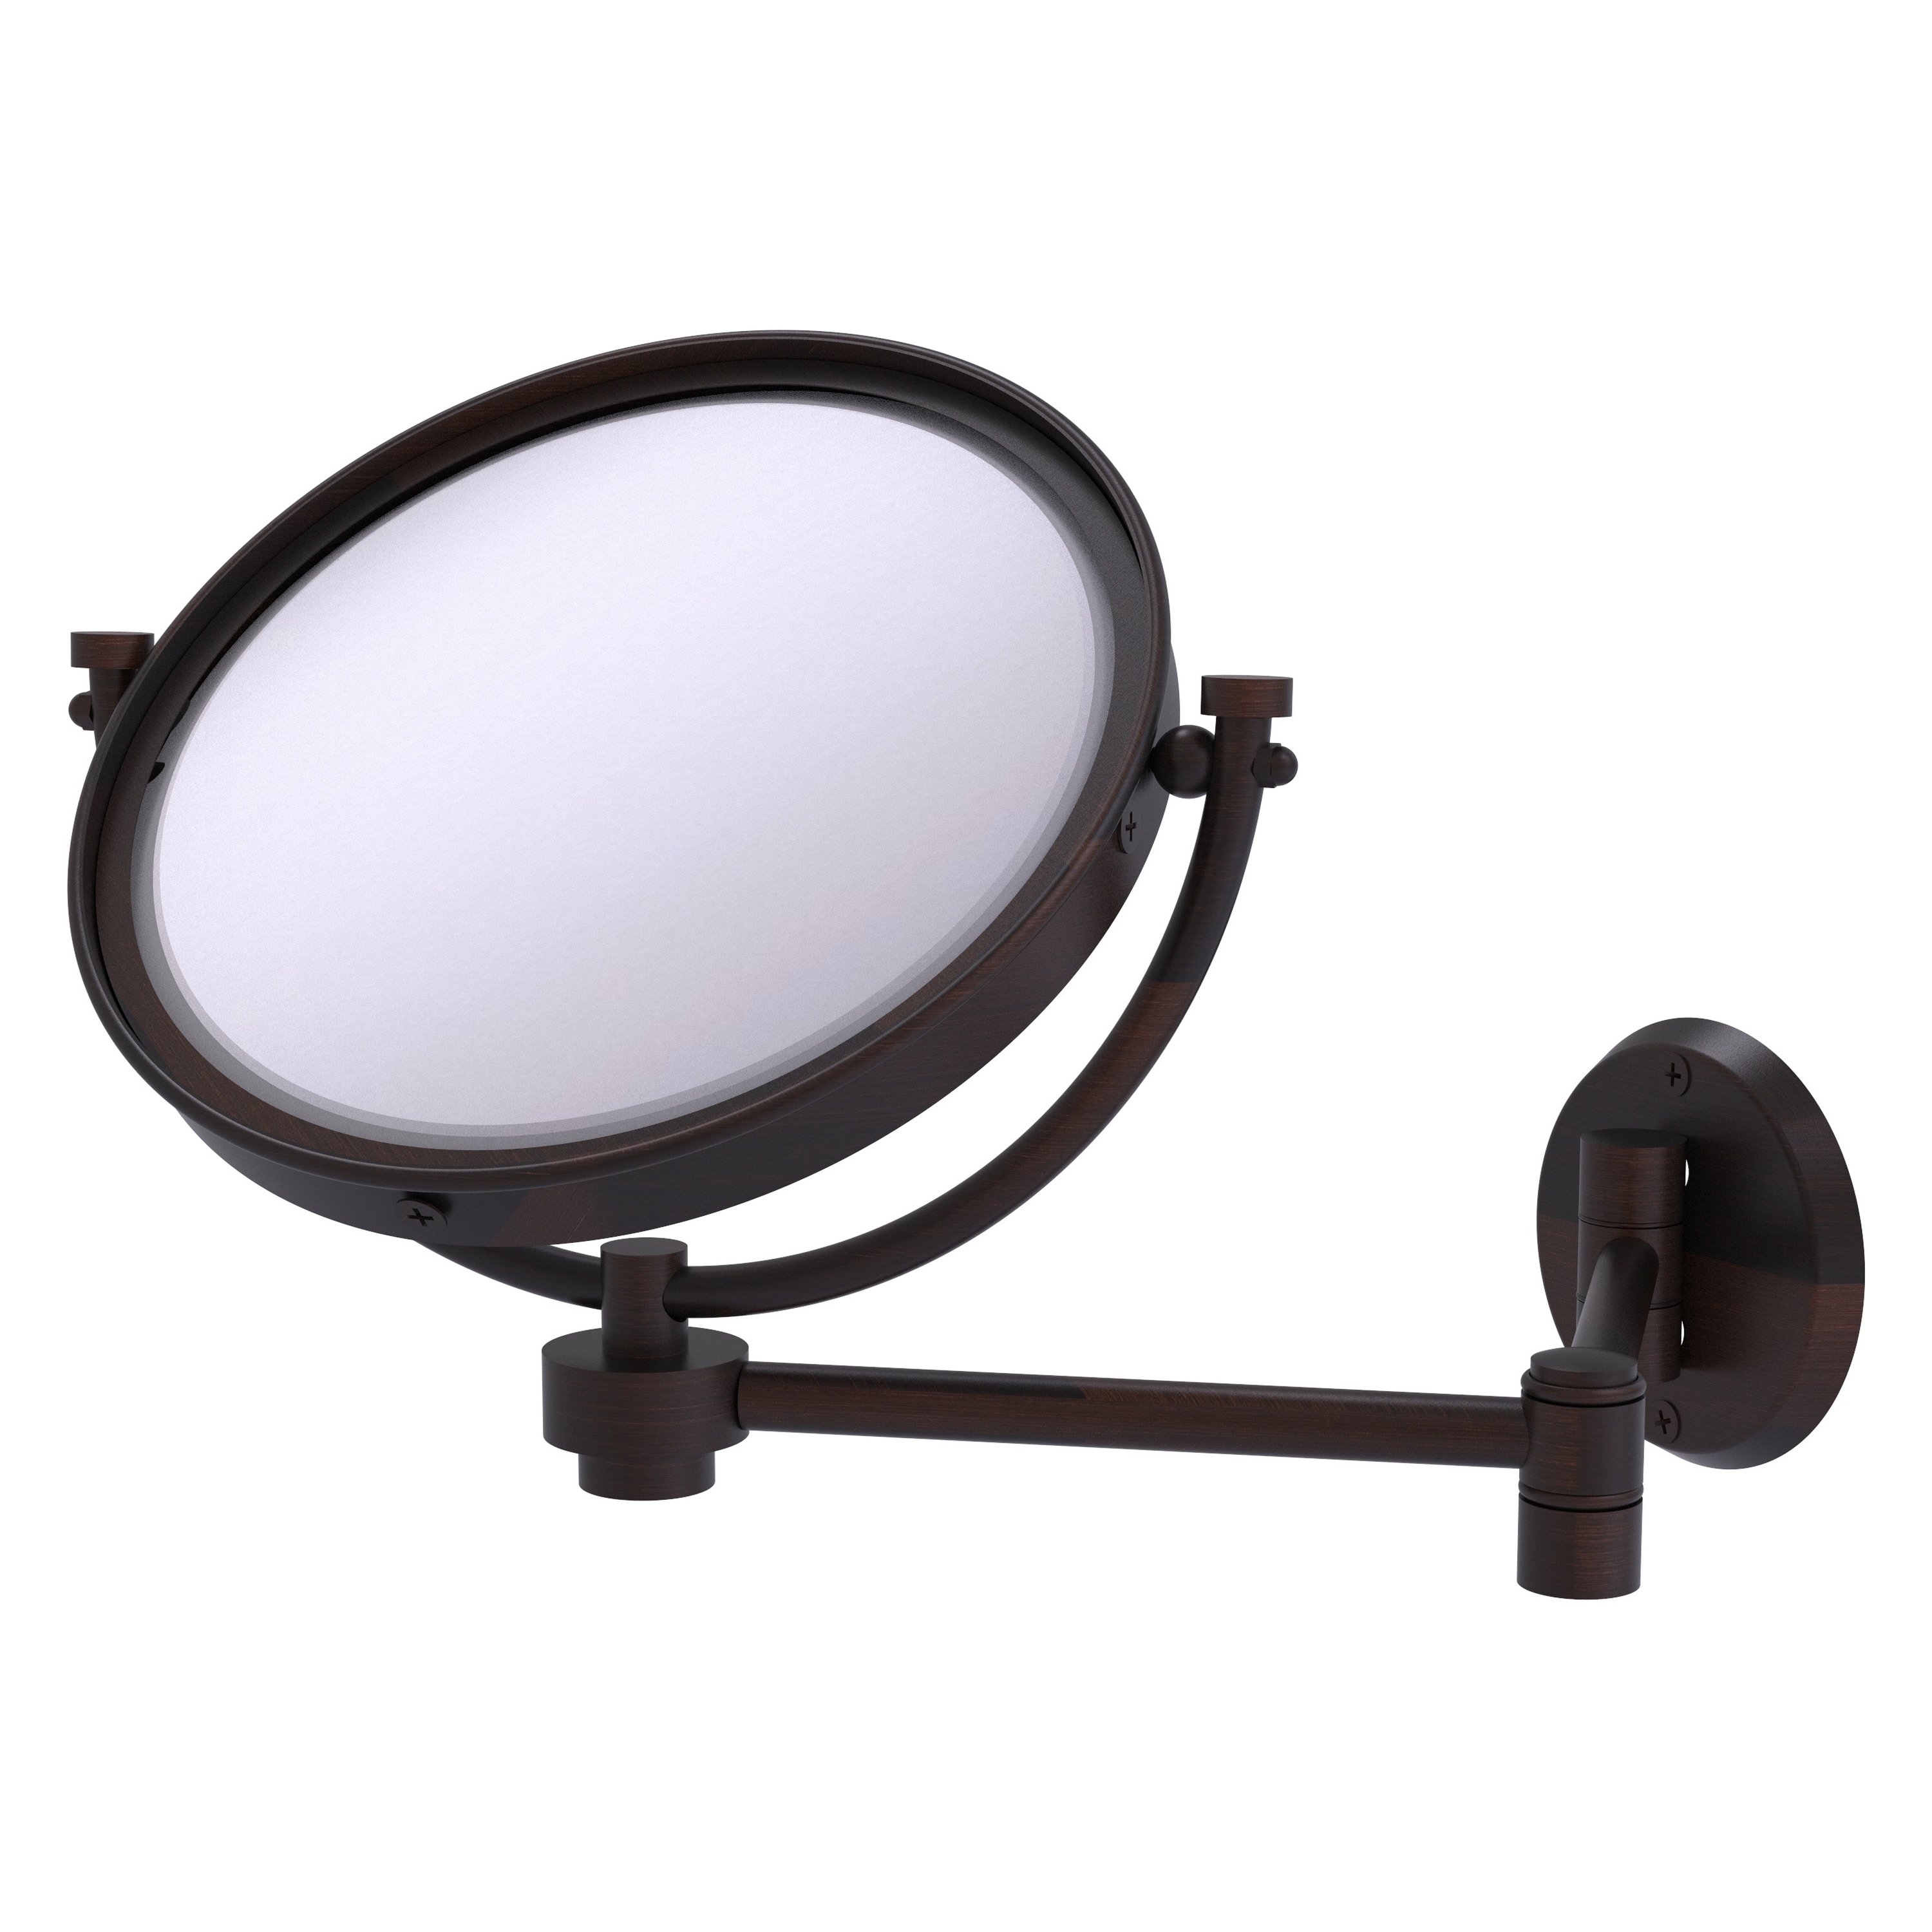 8-in x 10-in Distressed White Double-sided 5X Magnifying Wall-mounted Vanity Mirror | - Allied Brass WM-6/4X-VB